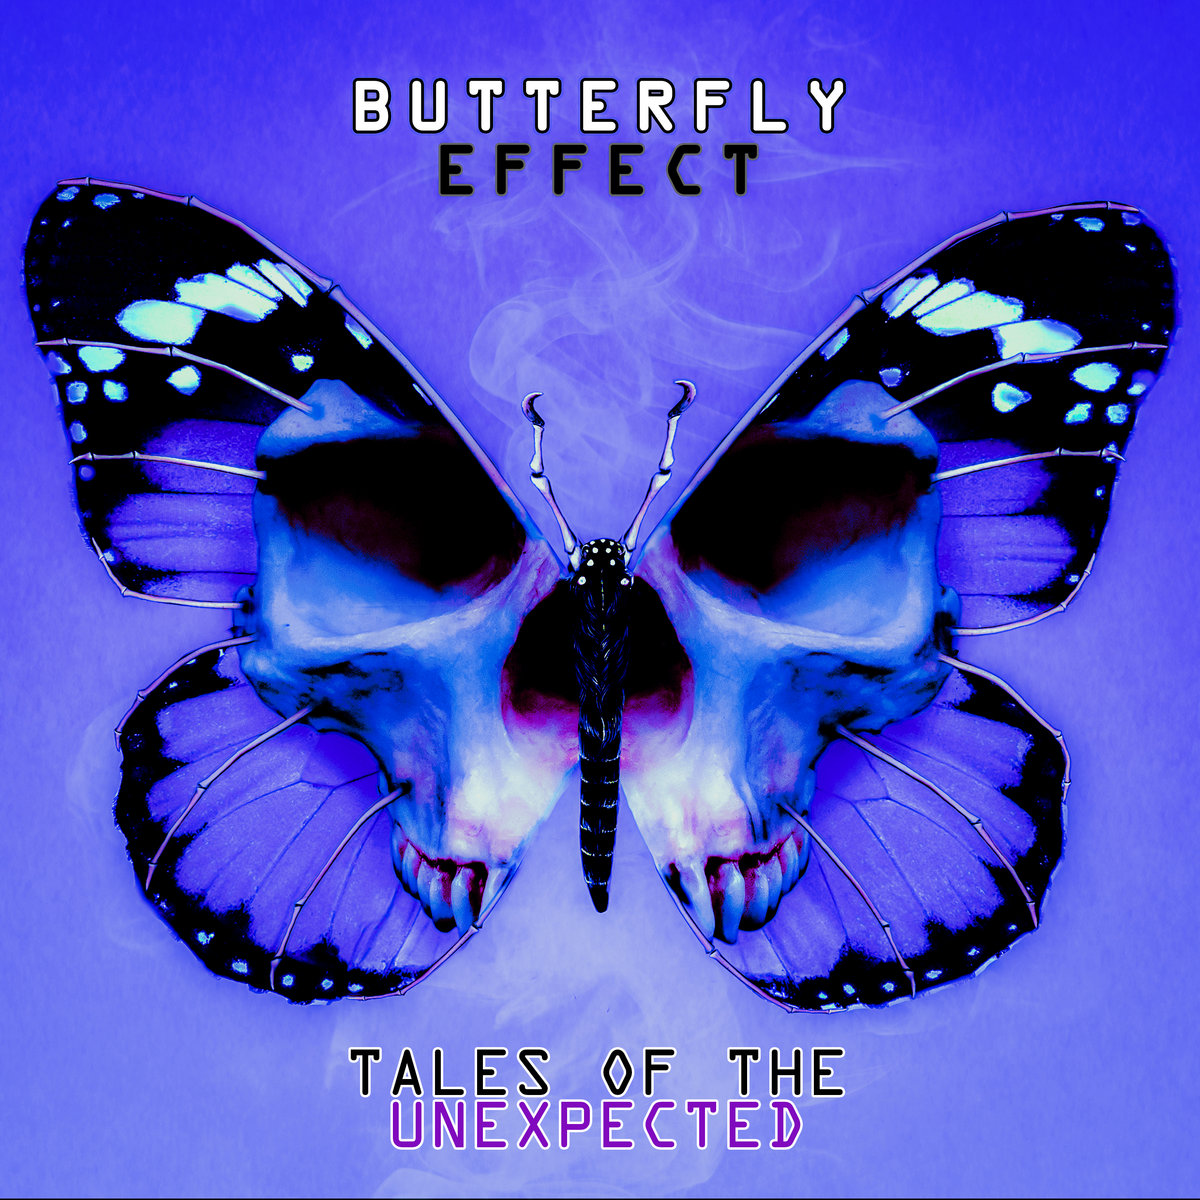 Cover design for Butterfly Effect #skulls #butterfly #photoshop #albumart #albumcover 

the album itself is available for free here - just get it for the artwork #butterflyeffect #talesoftheunexpected